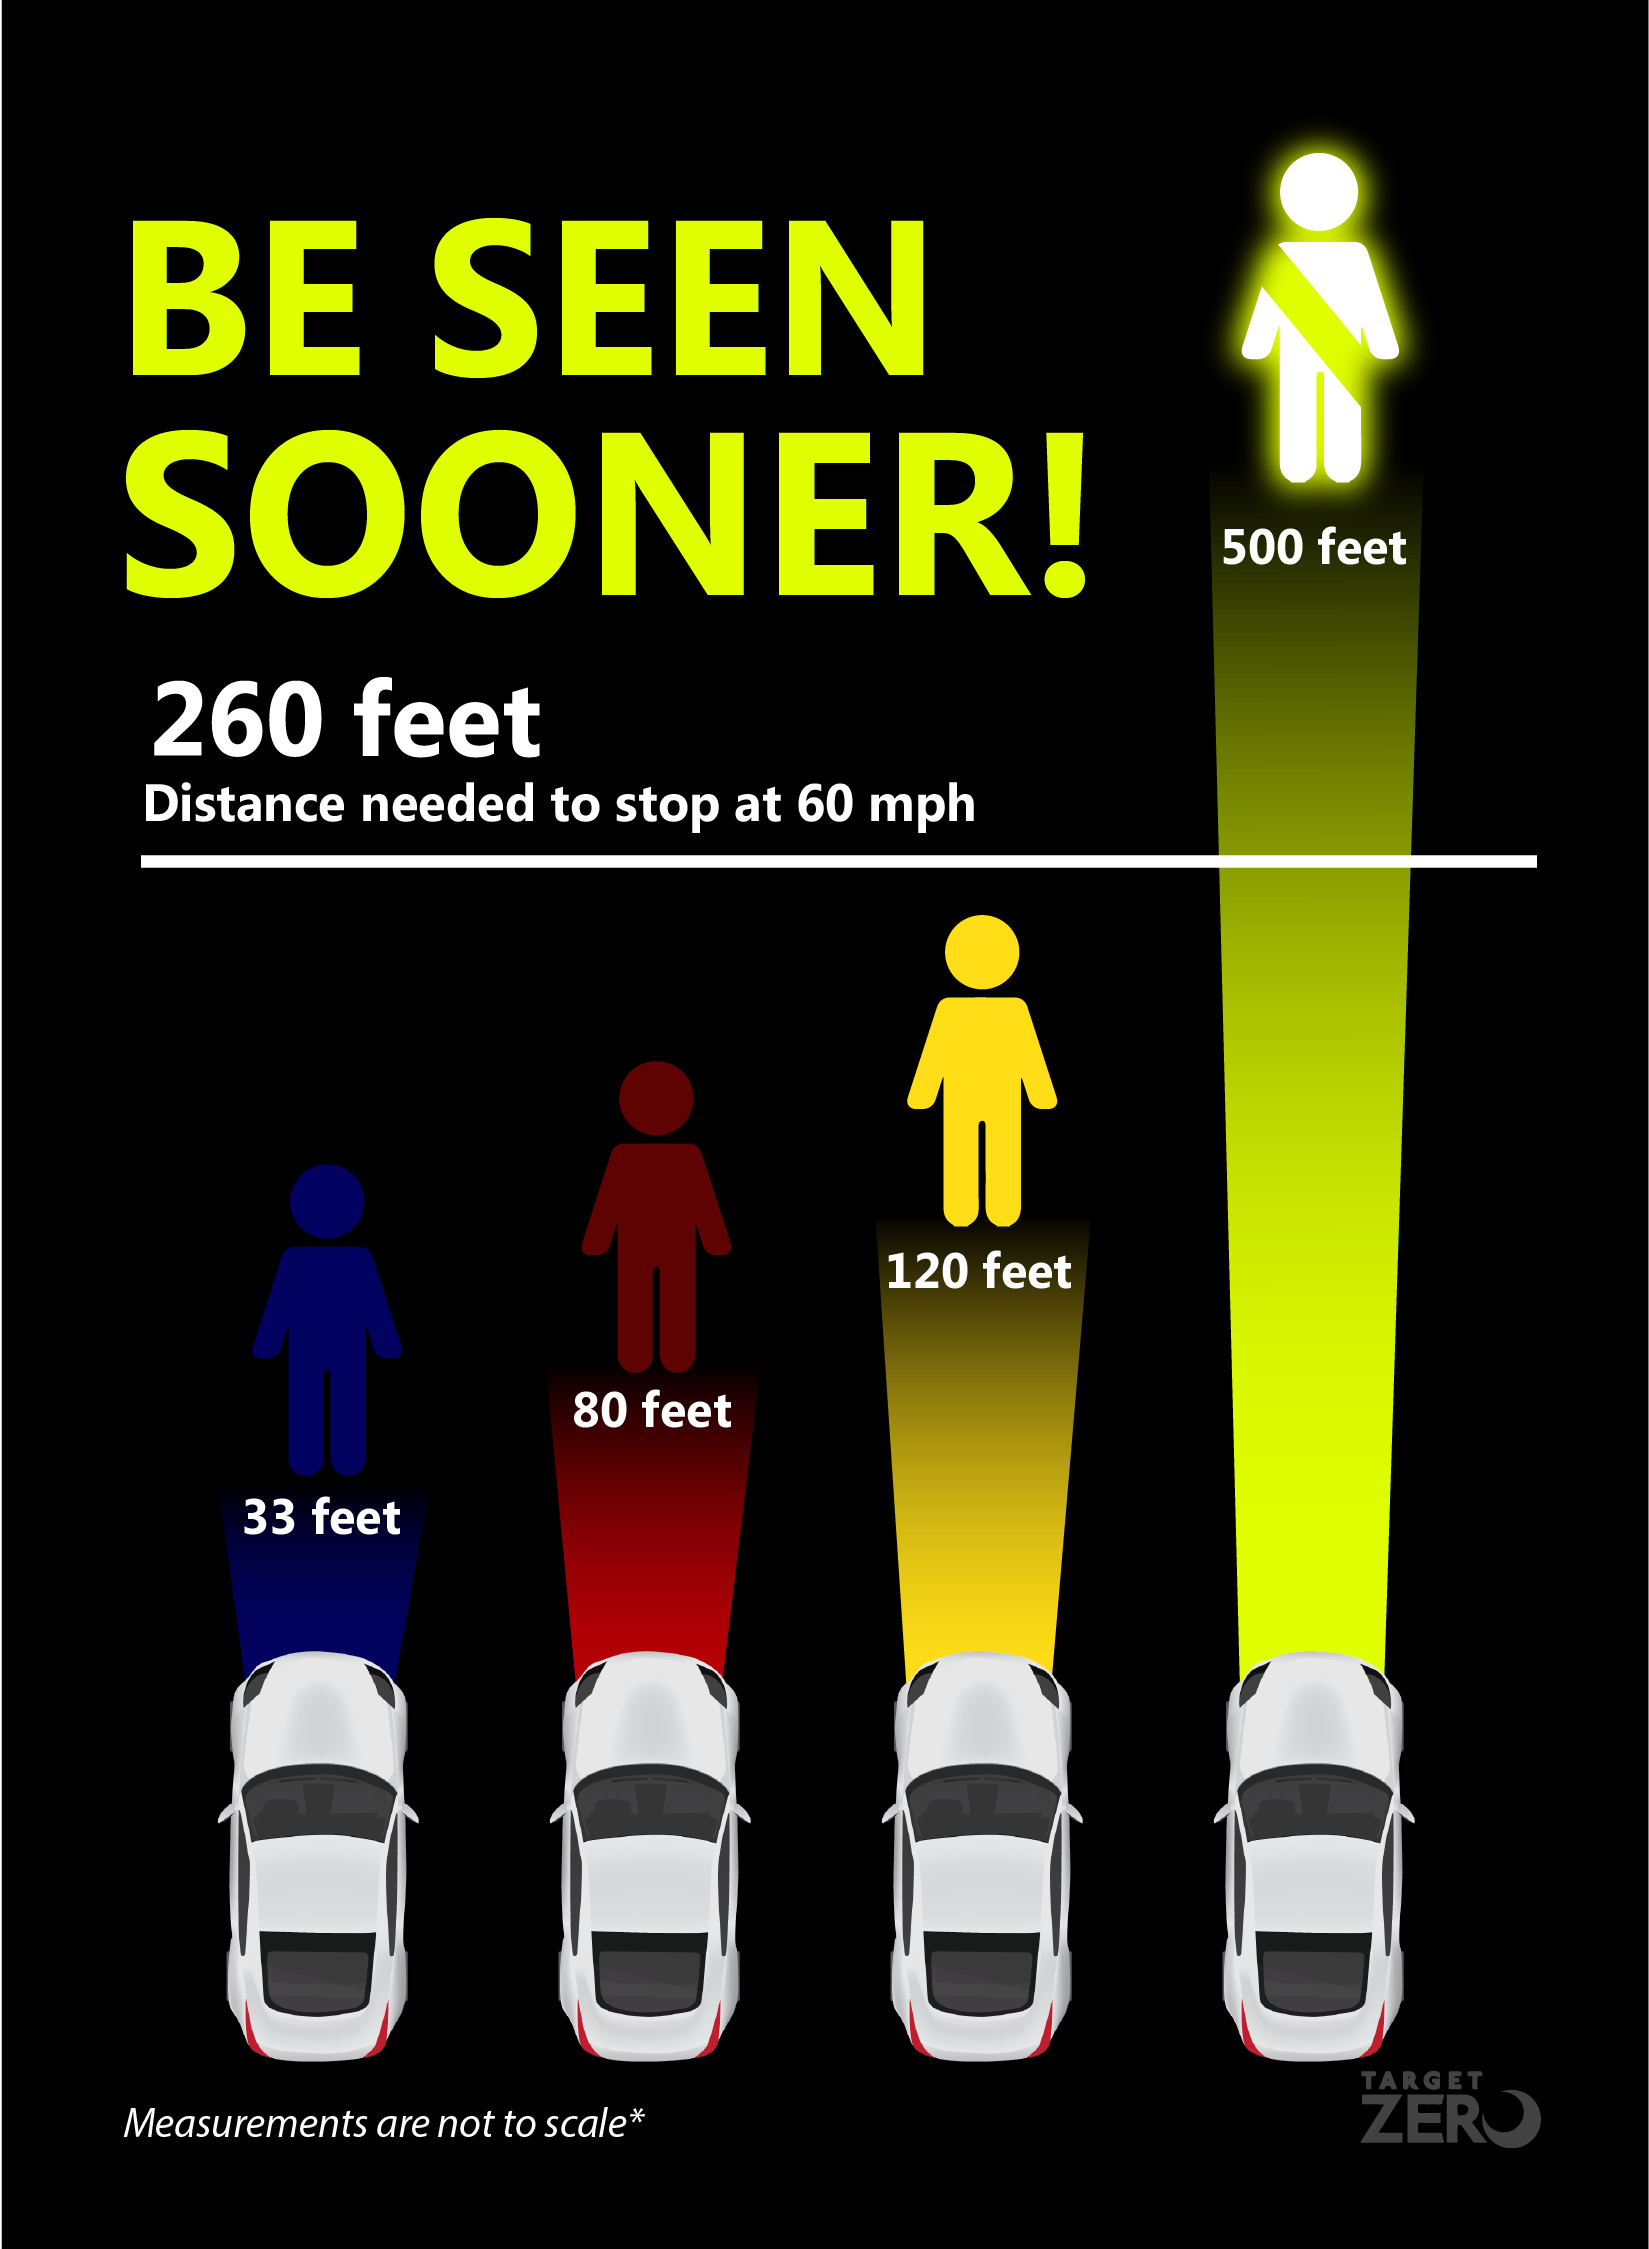 Be seen sooner. 260 feet is the distance needed to stop at 60 mph.